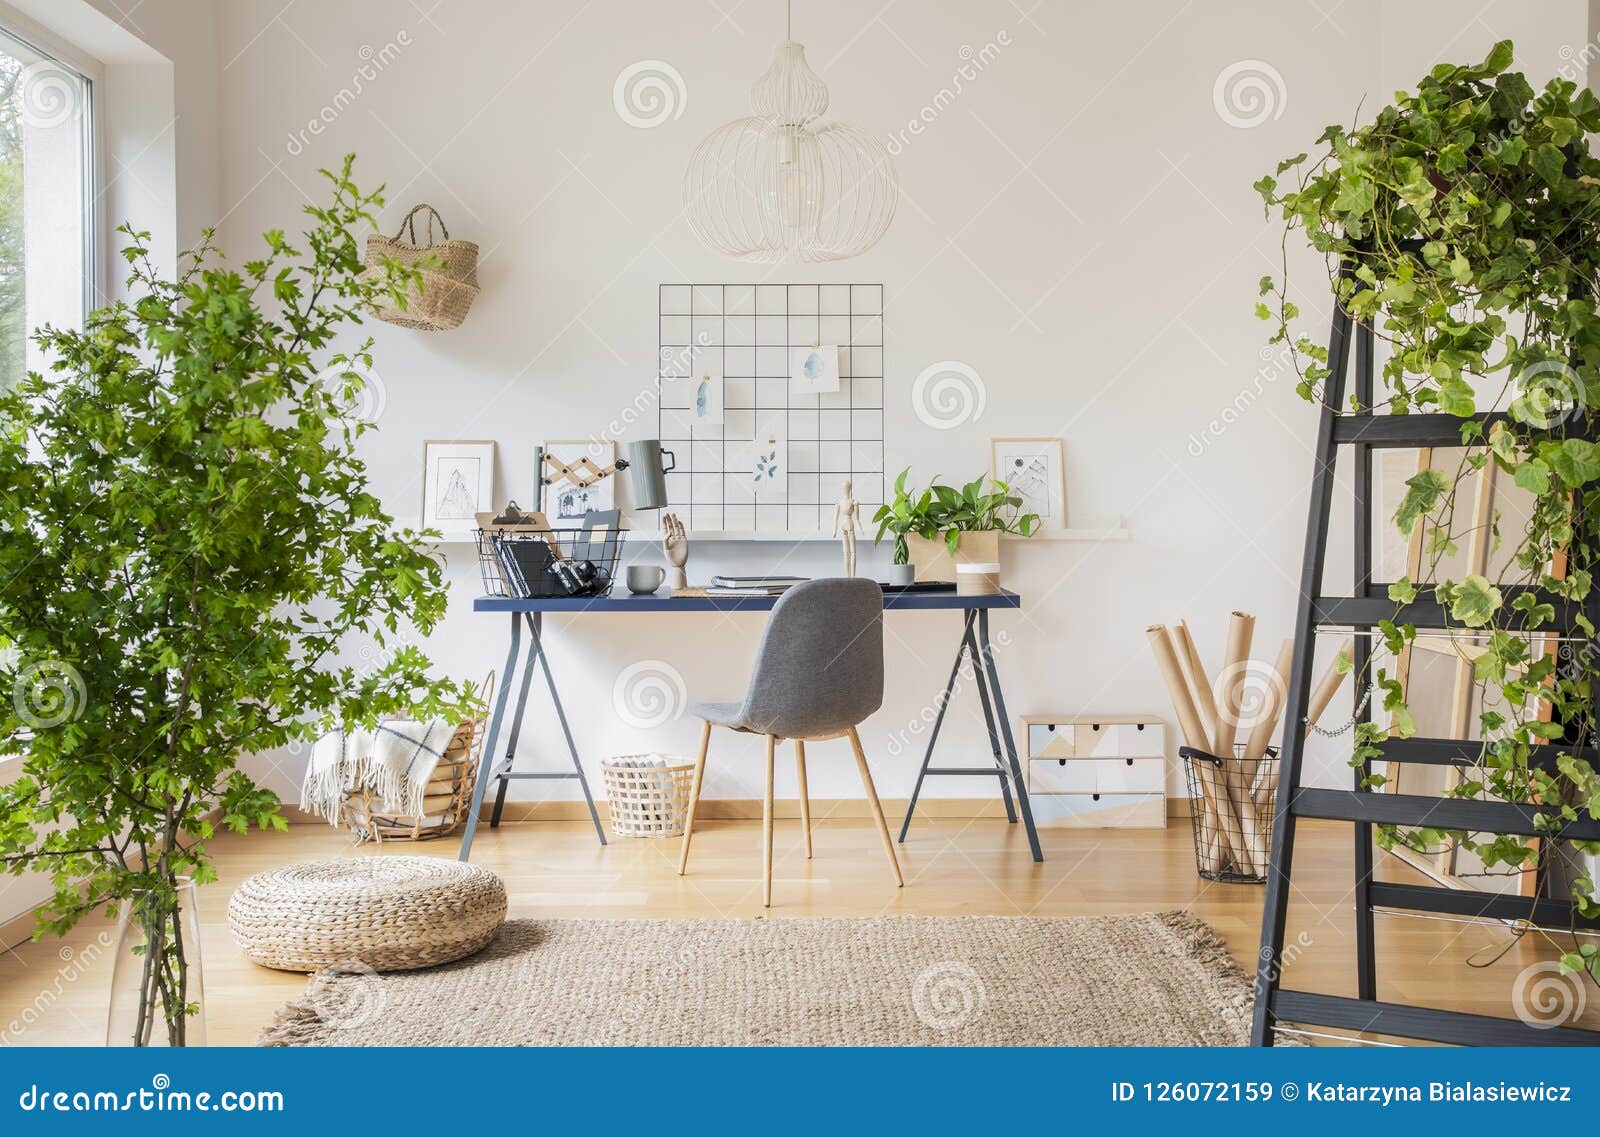 plants in white spacious home office interior with pouf on carpet near grey chair at desk. real photo